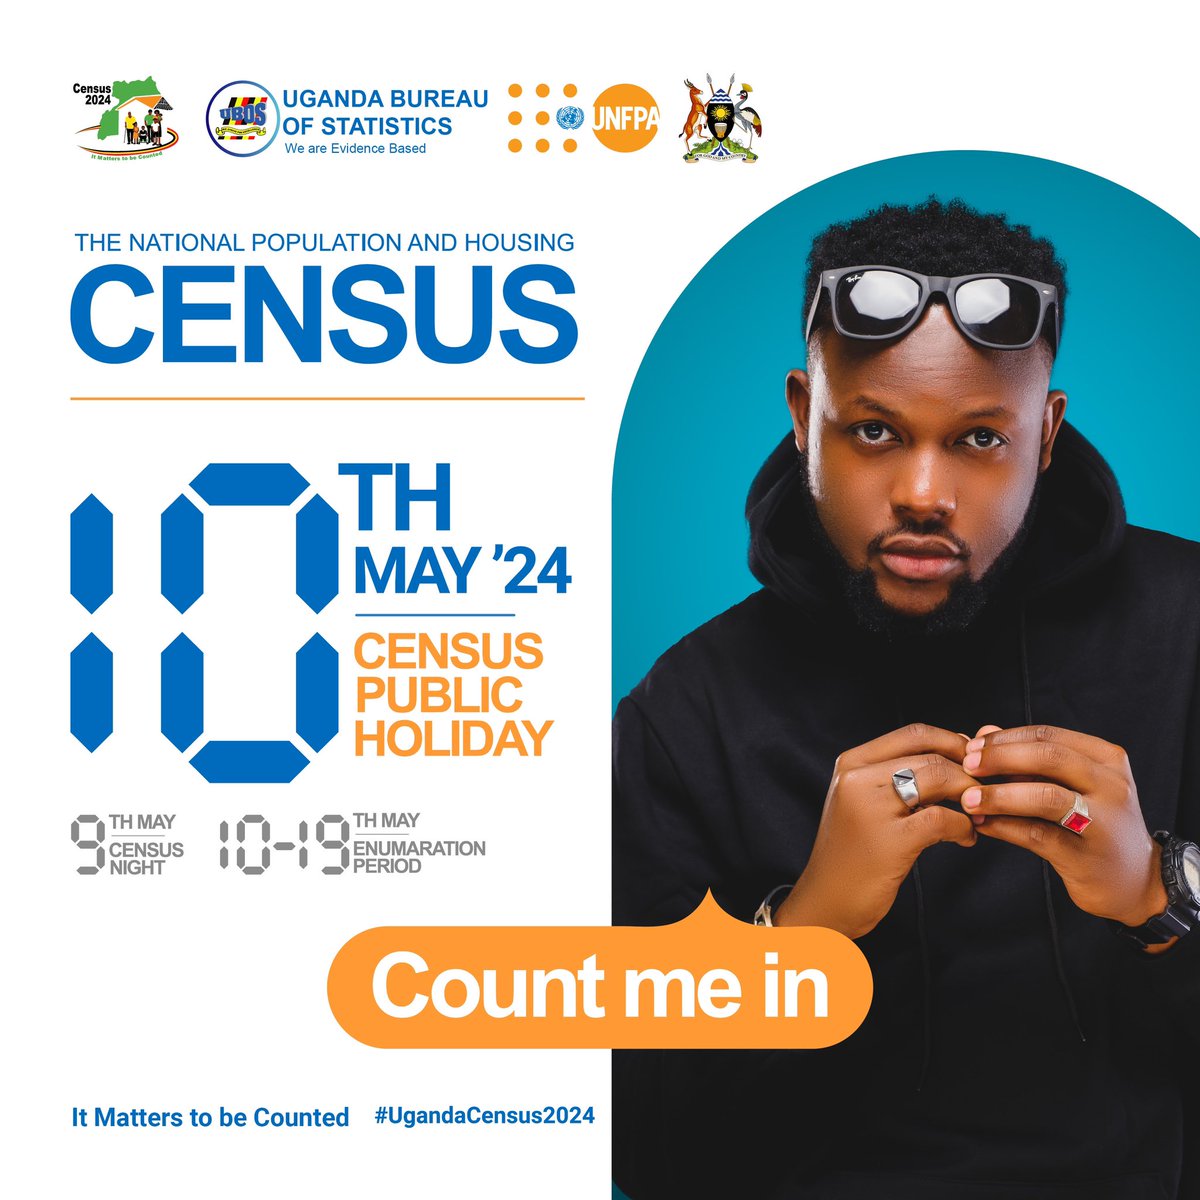 Taking part in the census is our civic duty. Stay home tomorrow, be counted and make your presence known for a better Uganda. Let's do this together balebe bange.

#UgandaCensus2024